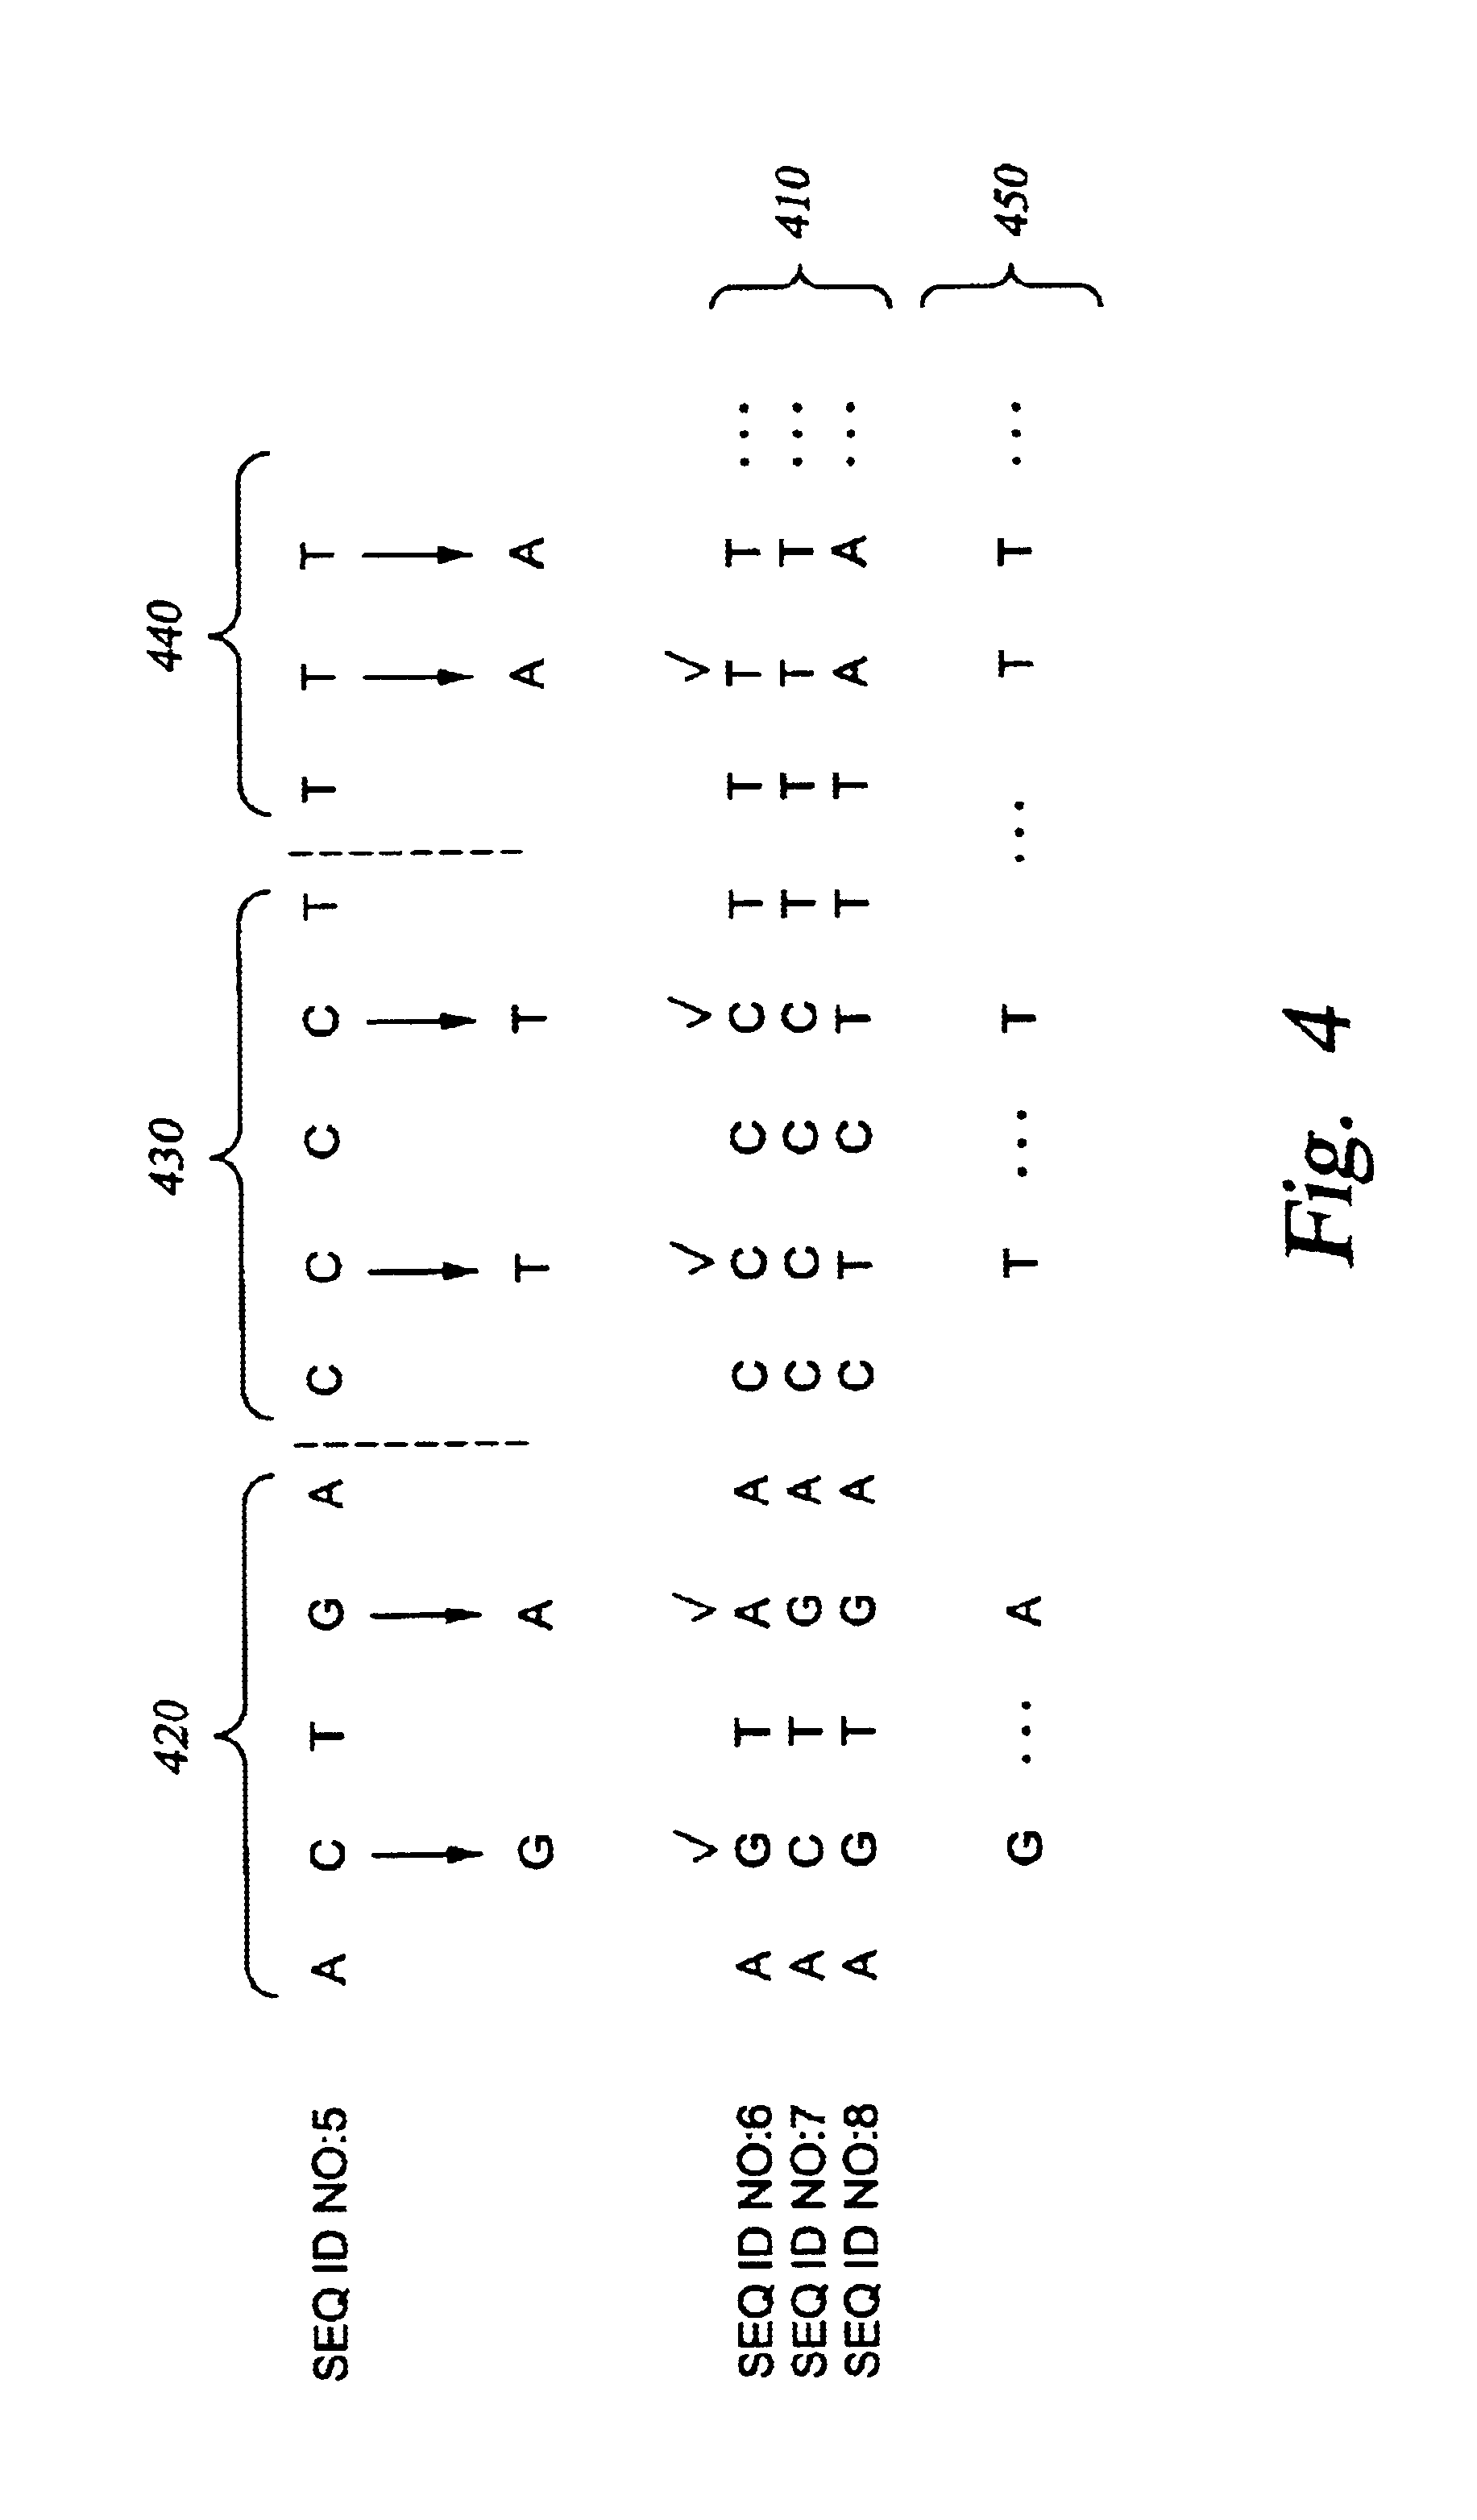 Genetic analysis systems and methods